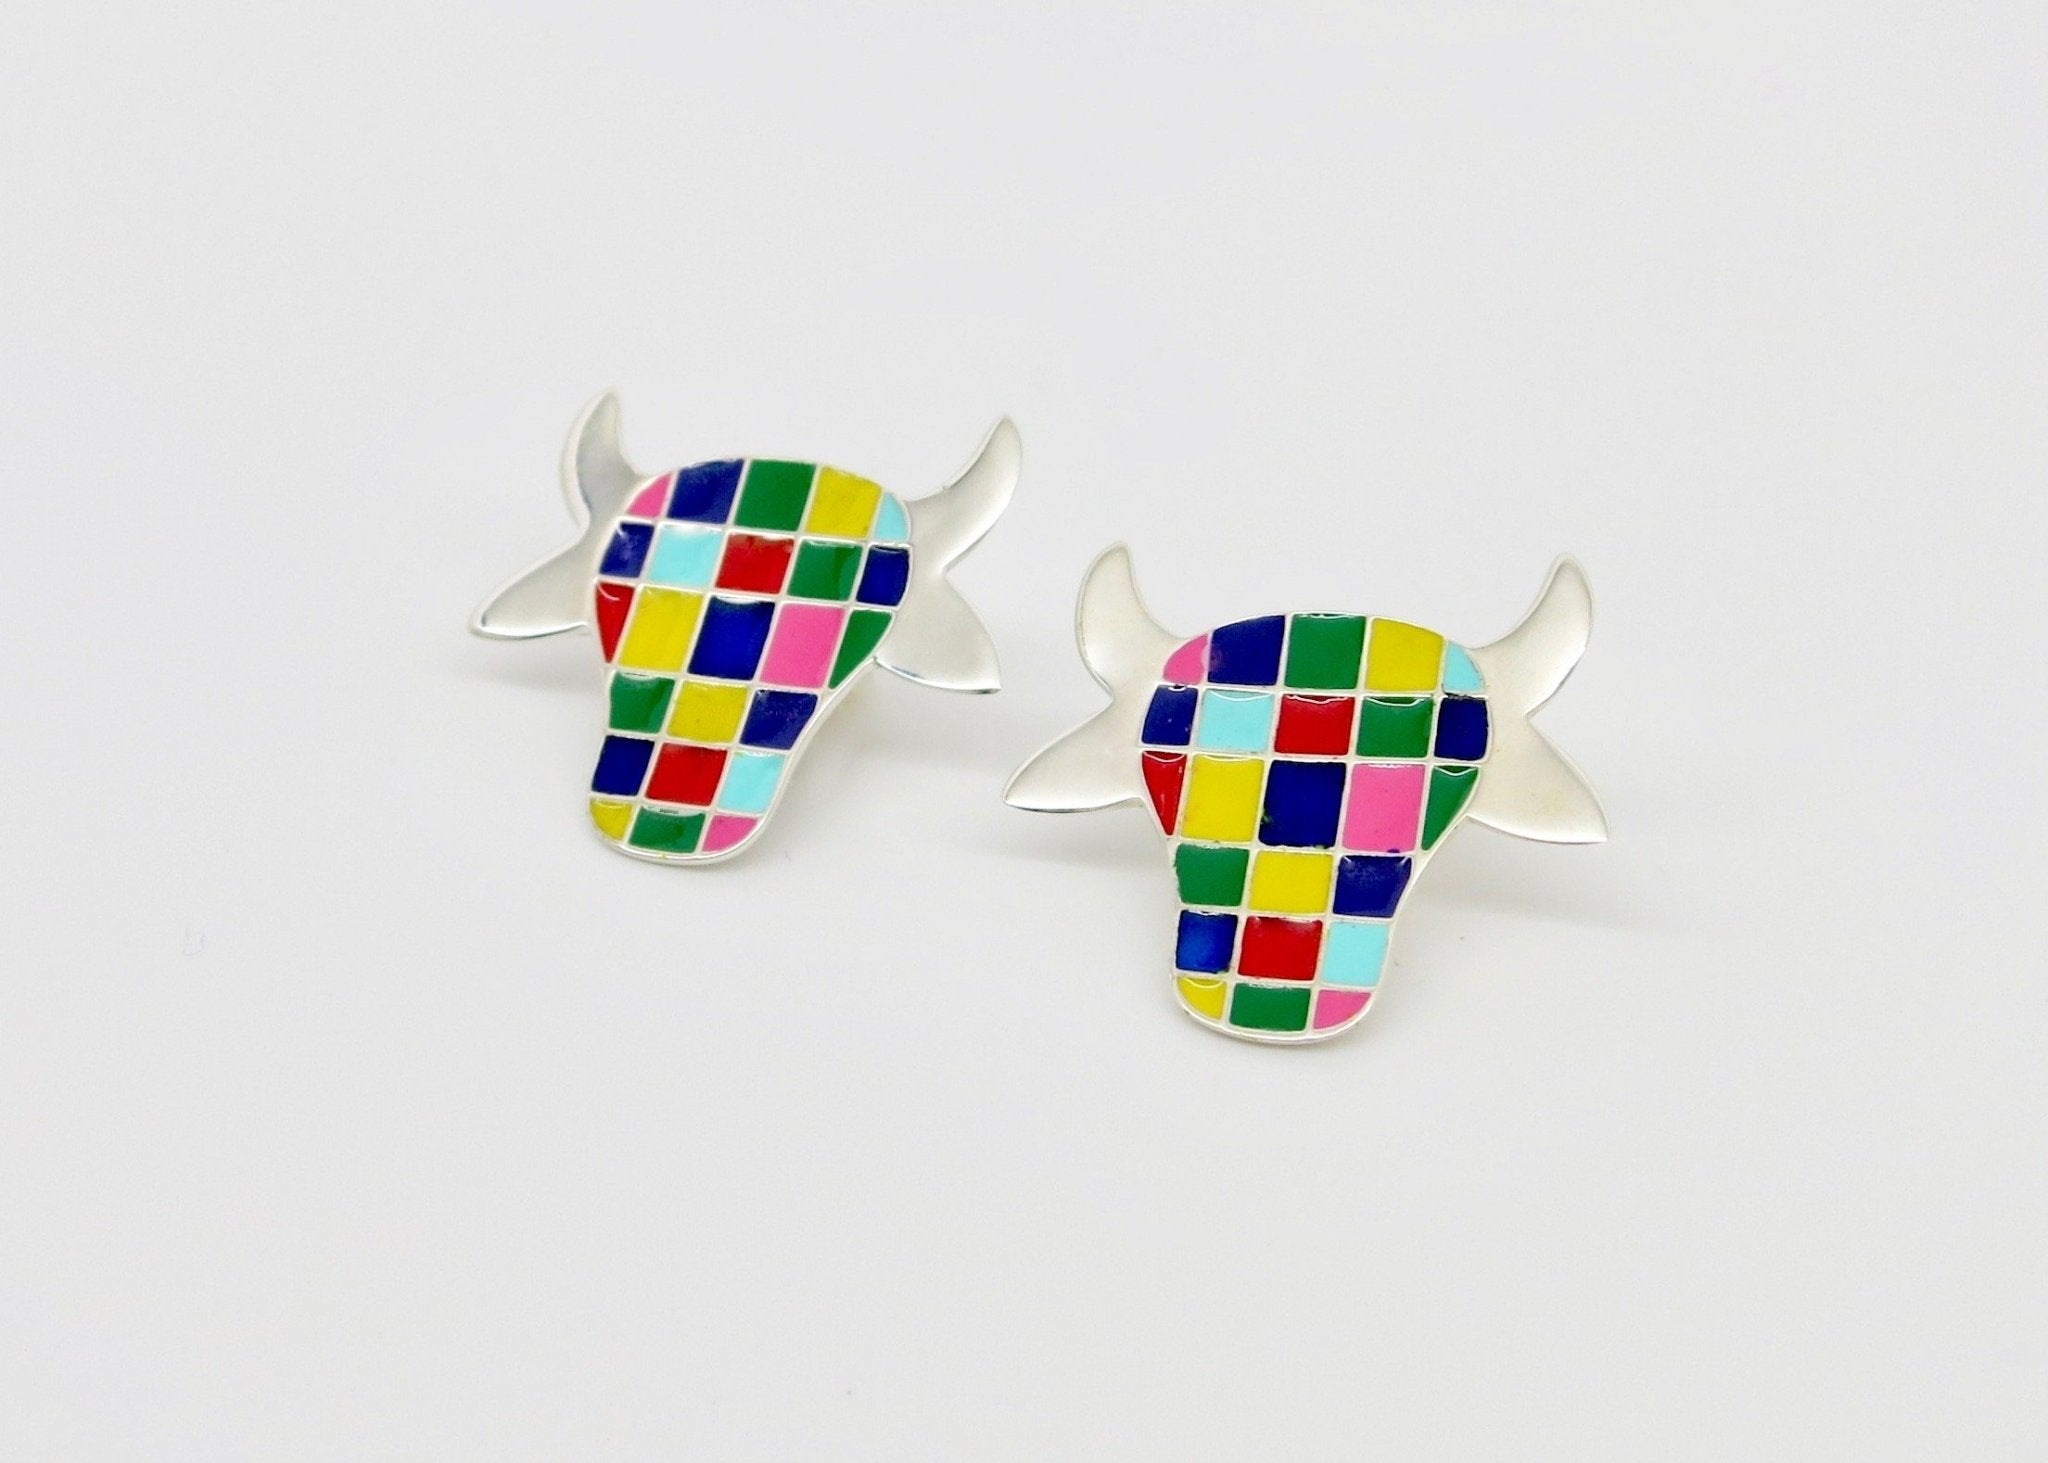 Whimsical and uber cool 'dhenu' (cow) ear studs - Lai